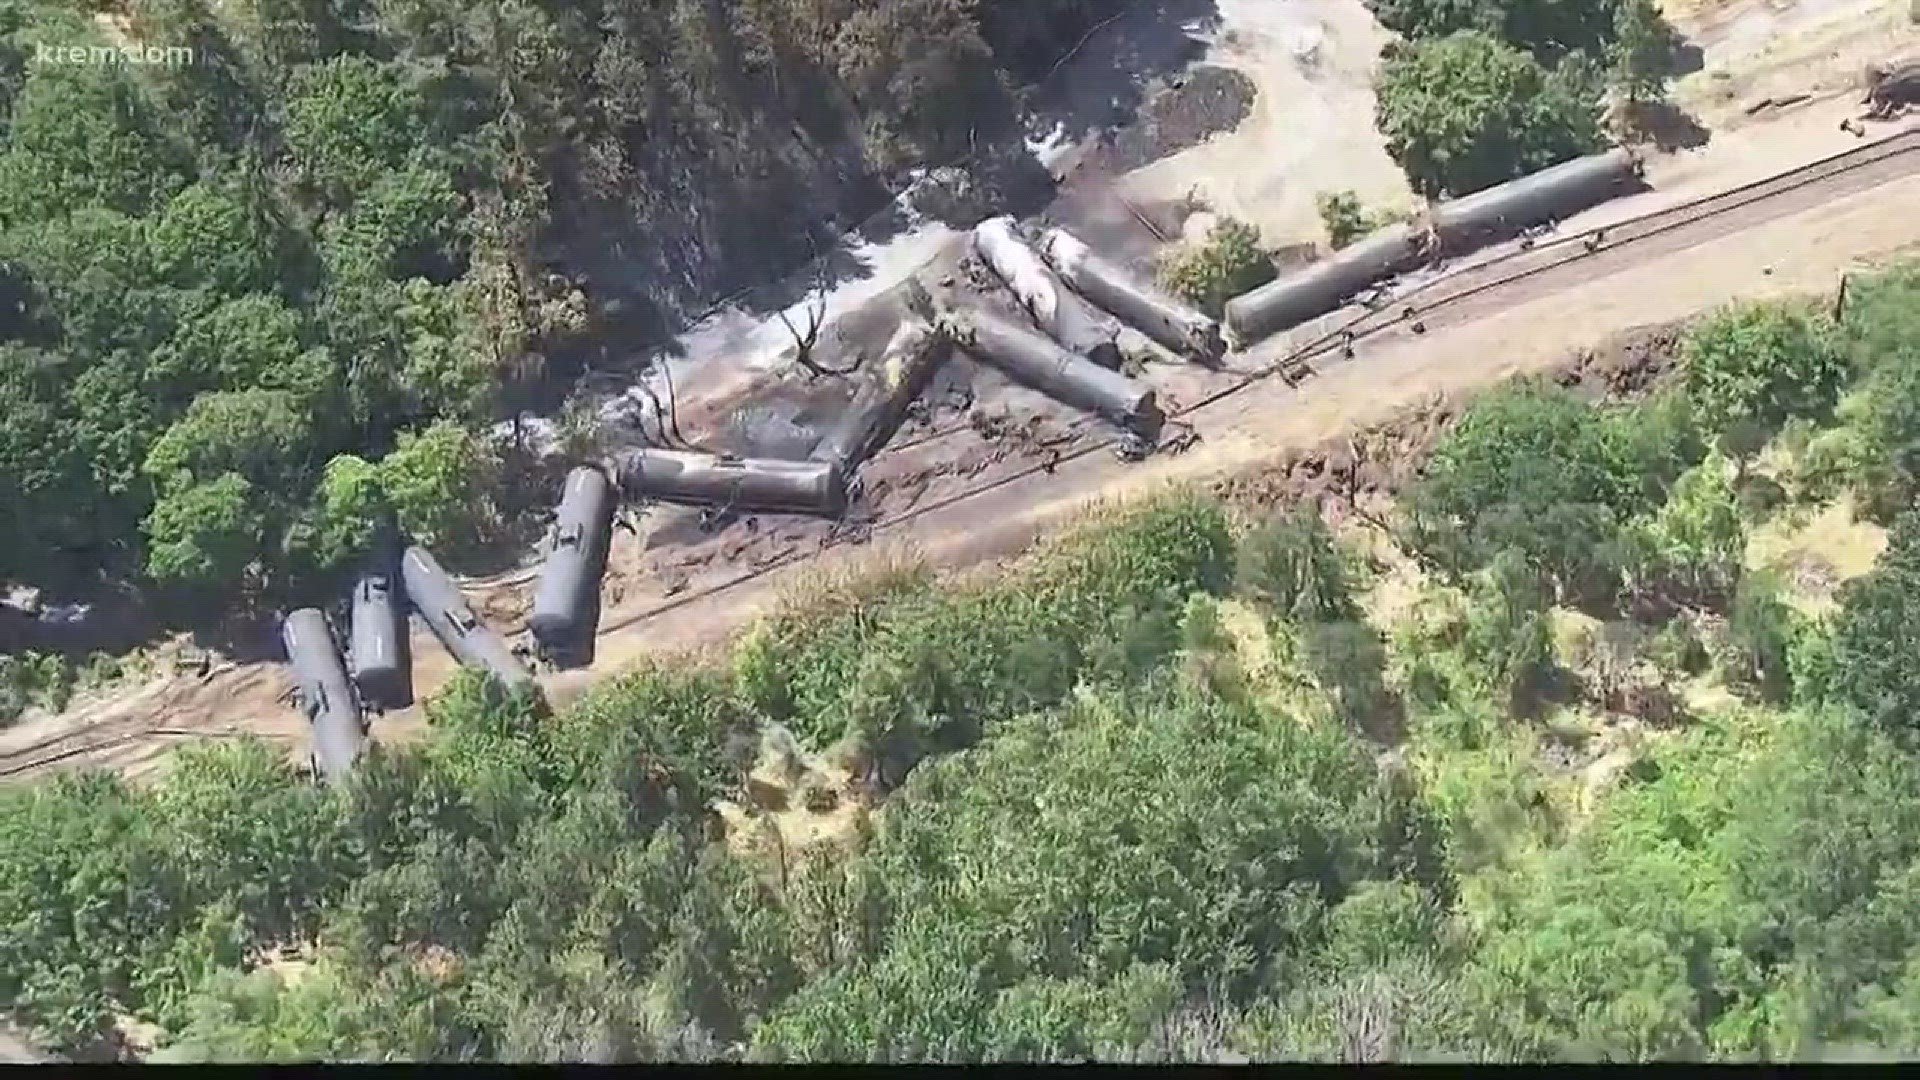 How Spokane area first responders prepare to deal with a train derailment *if* it were ever to happen. (12-18-17)